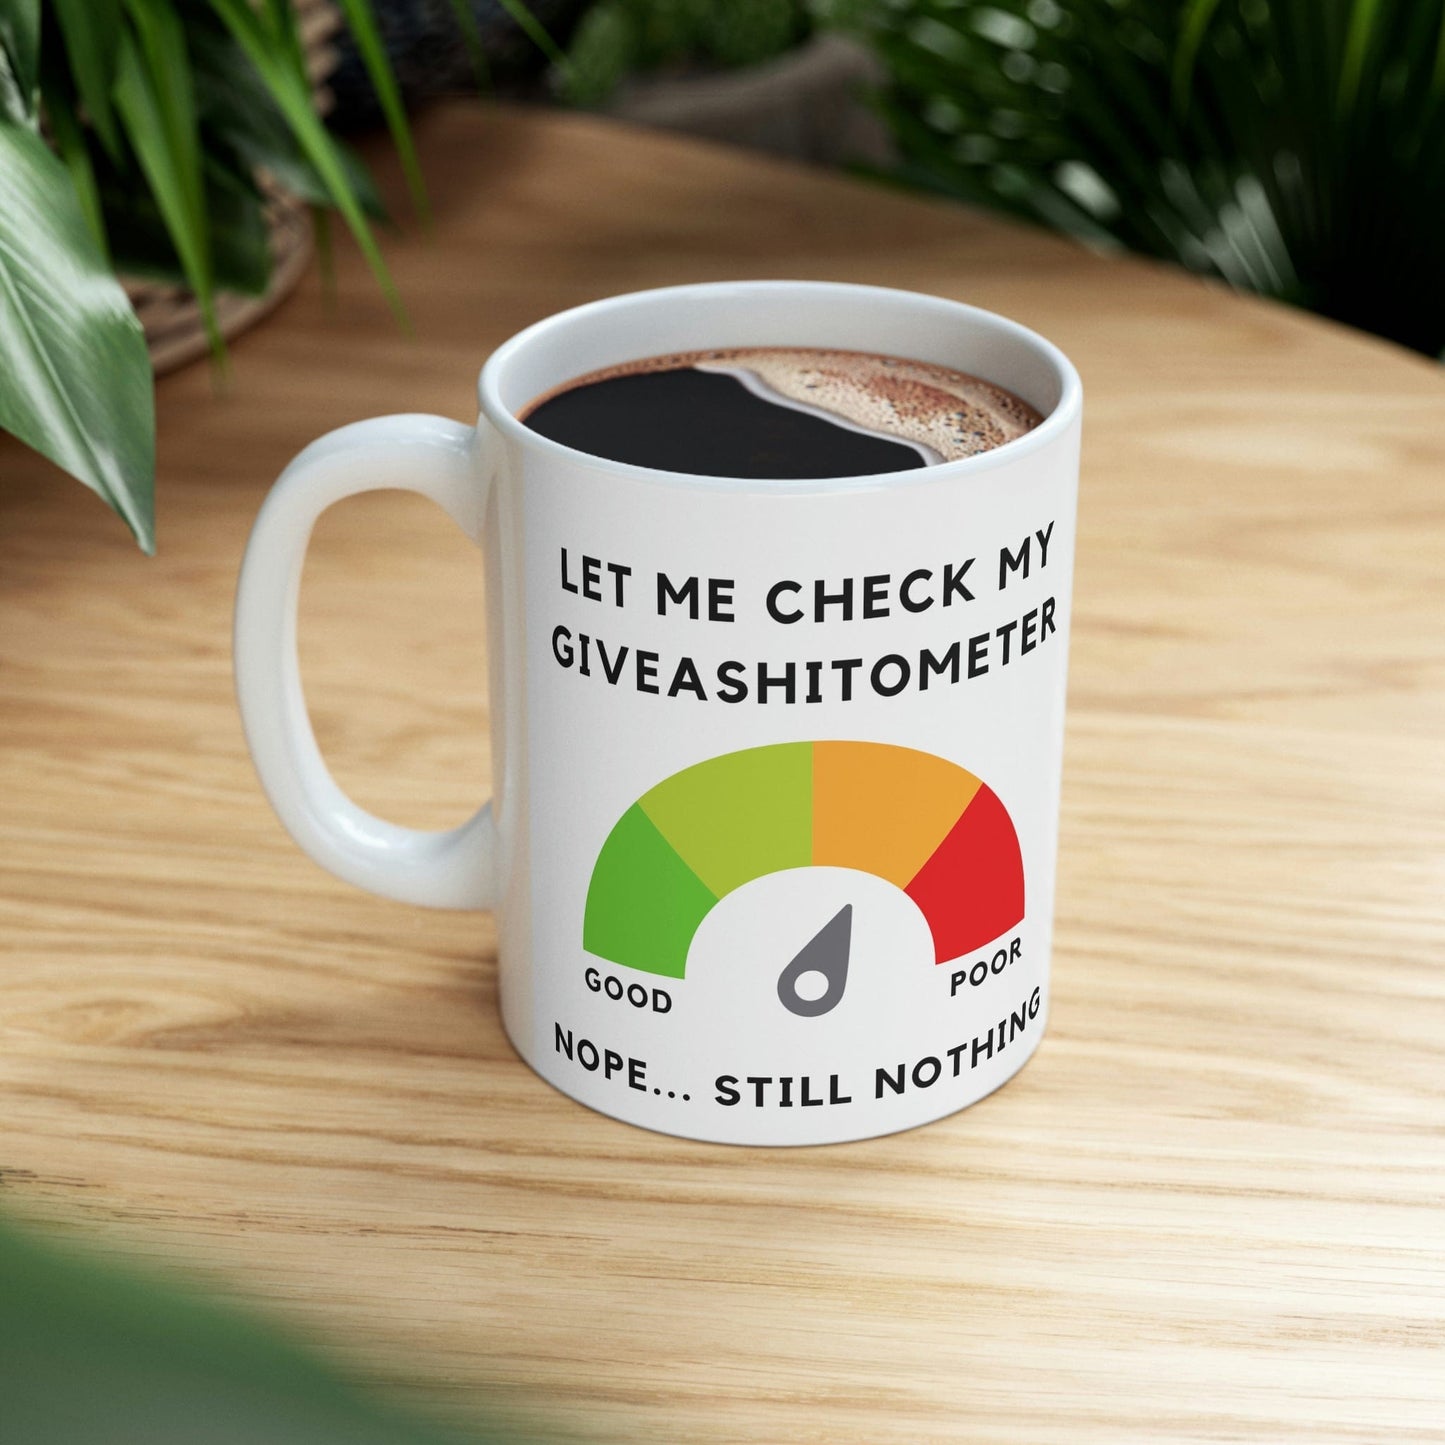 Funny Mugs for Coworkers or the Office - Quitter Retirement Funny Mug Gifts